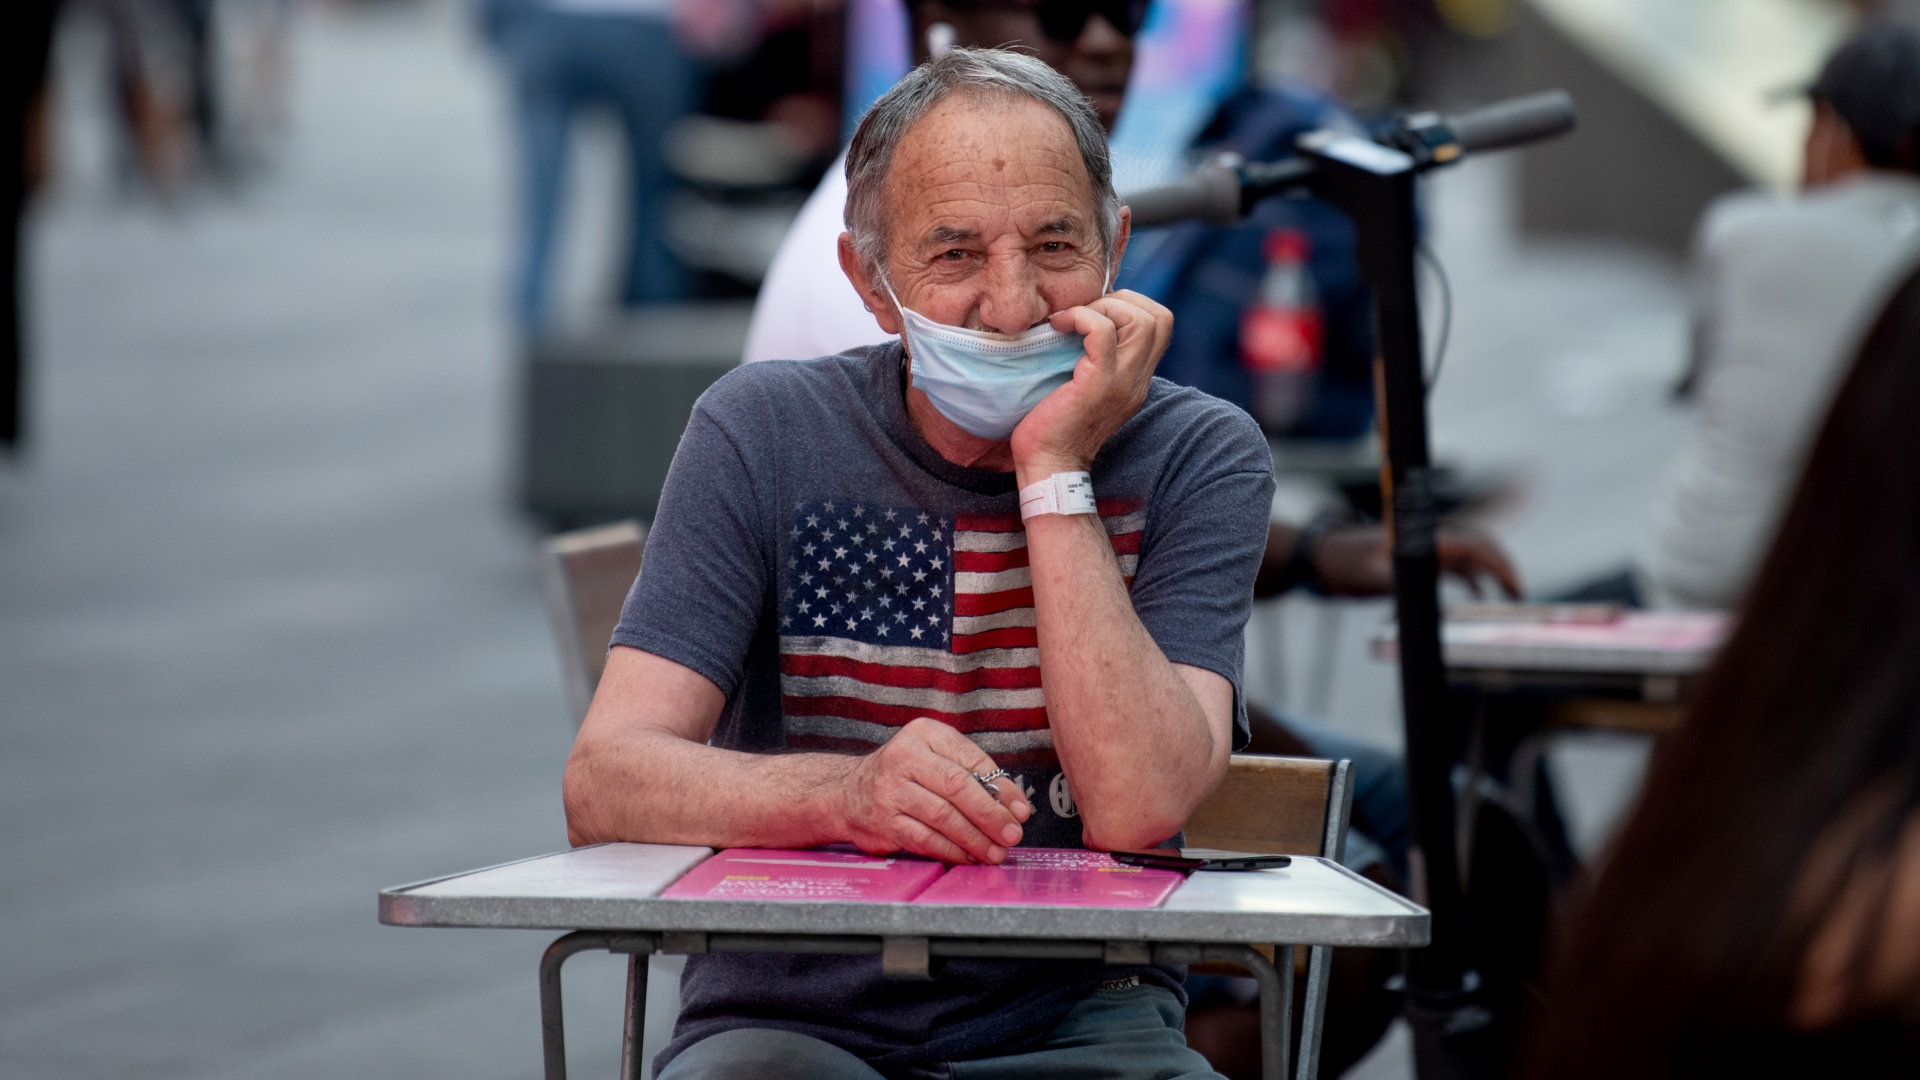 A man wearing a mask below his nose sits at an outdoor table in Times Square, New York City, in August 2020.